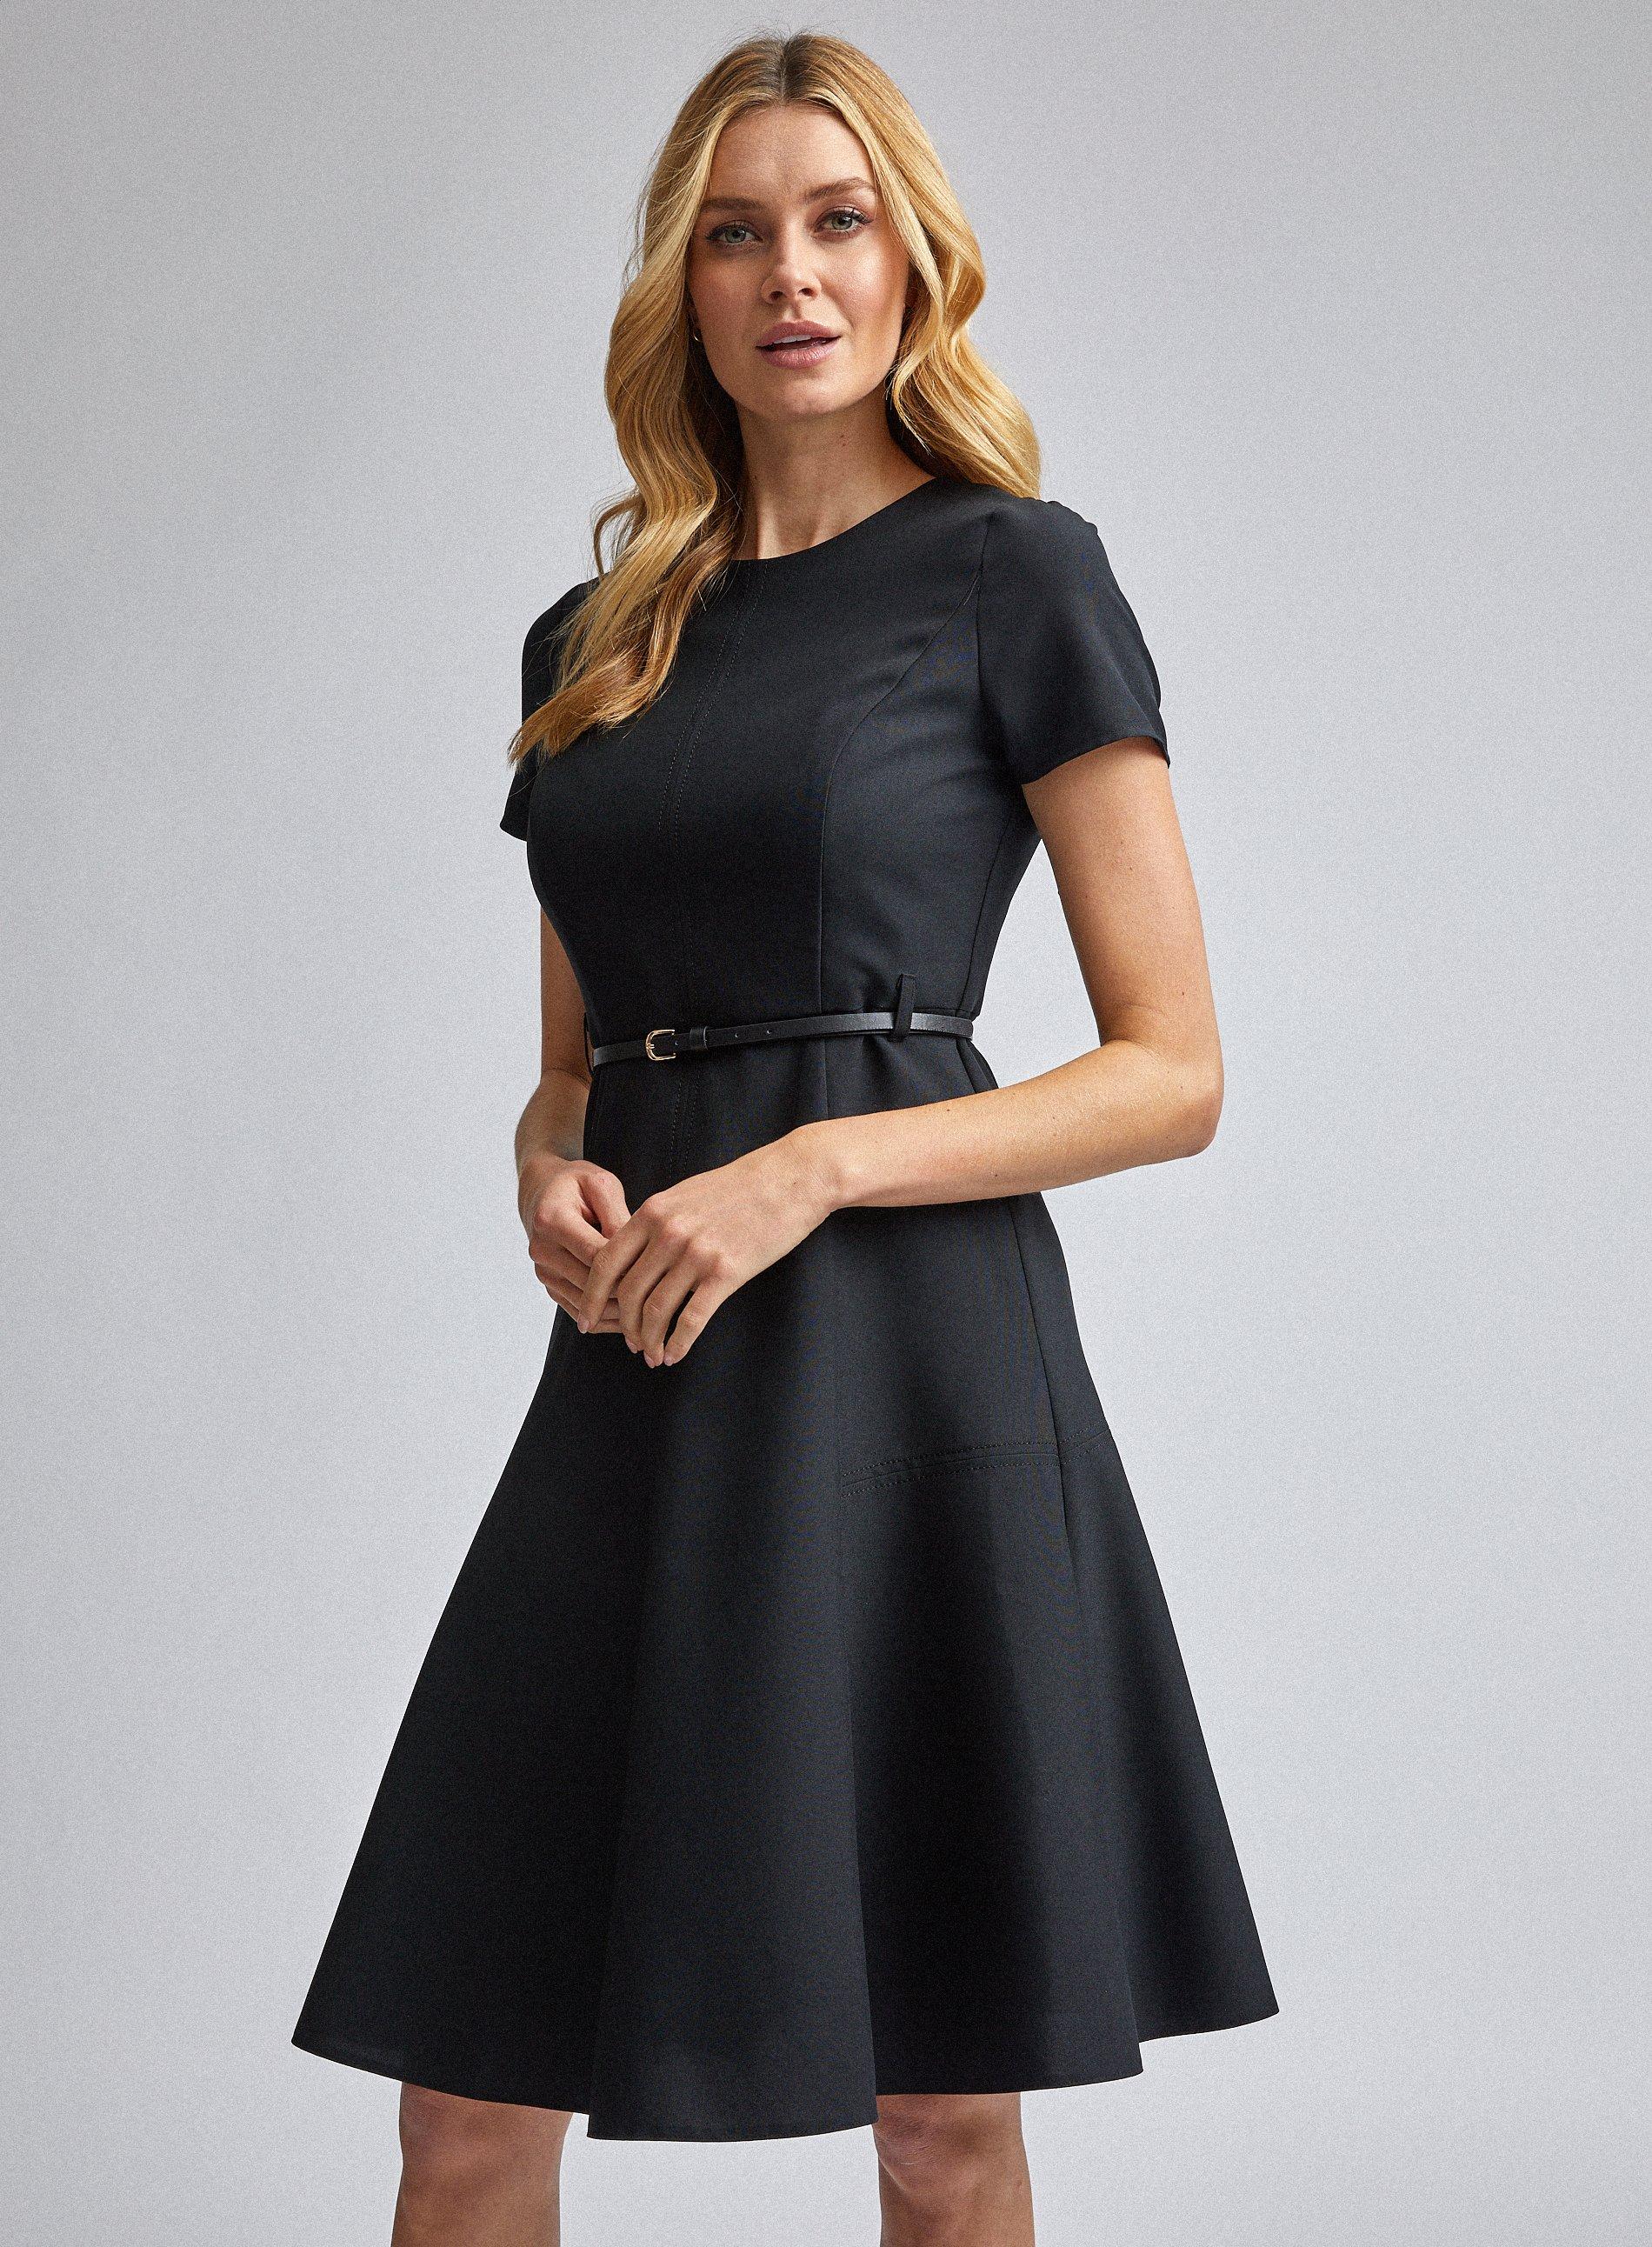 Black Fit and Flare Dresses